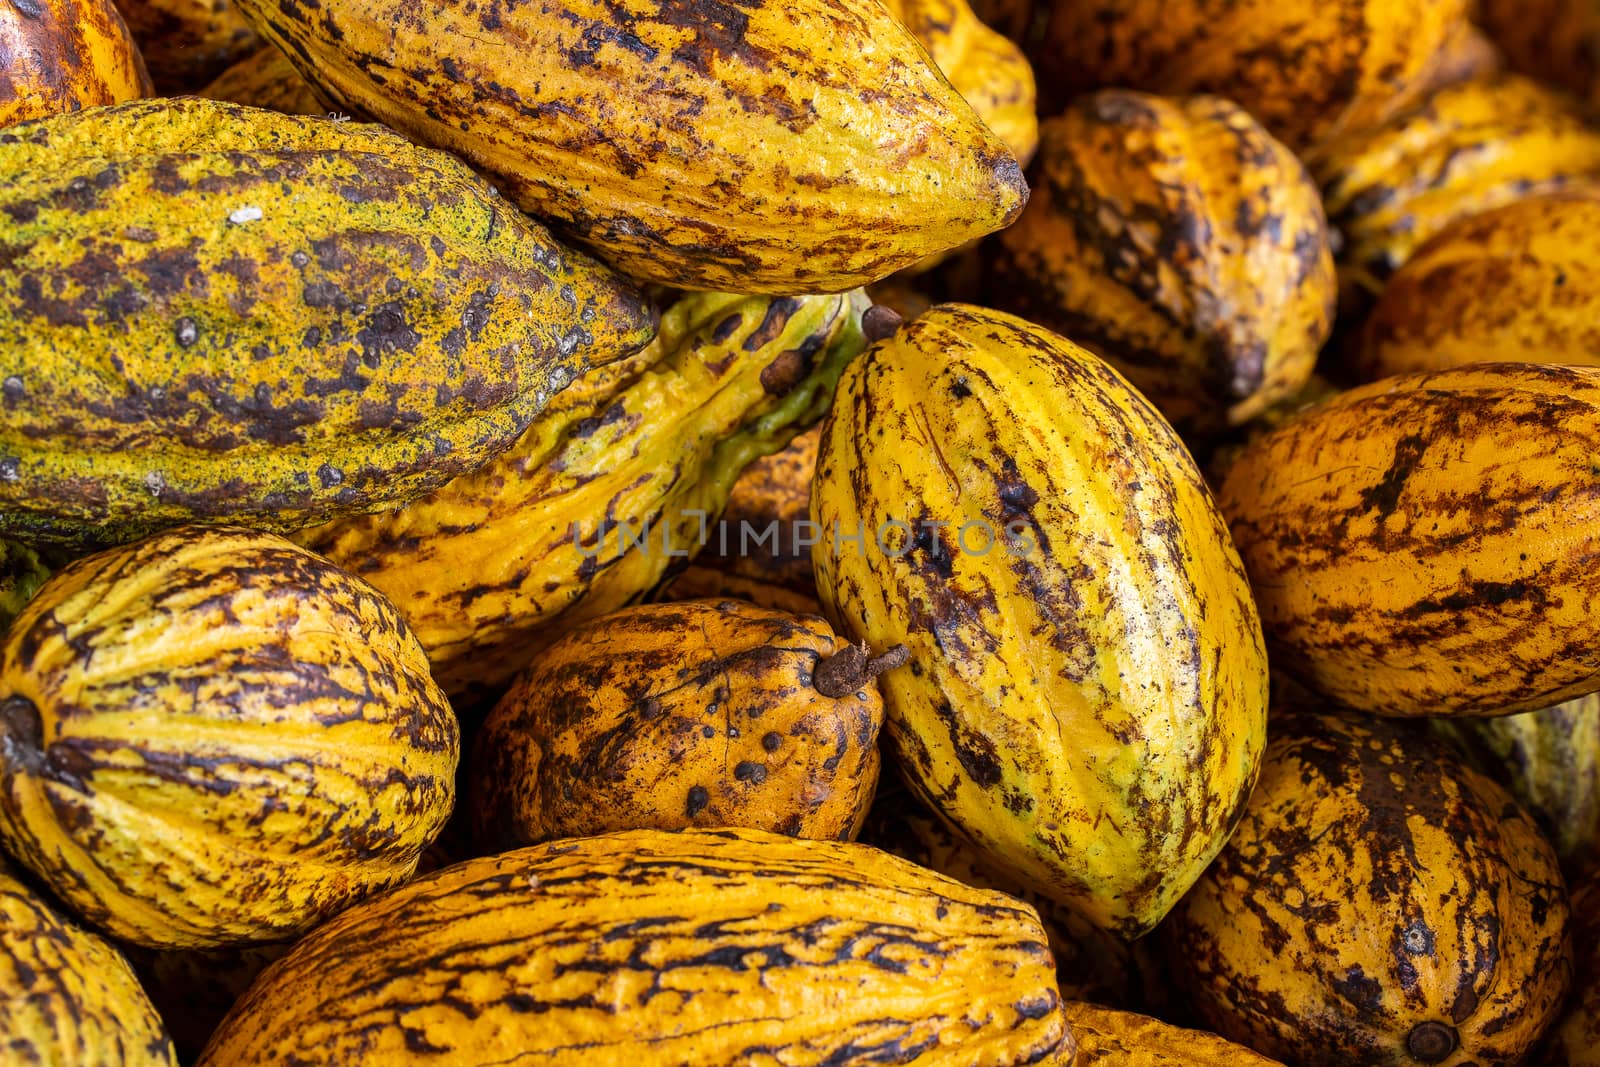 Cocoa beans and cocoa pod on a wooden surface by freedomnaruk